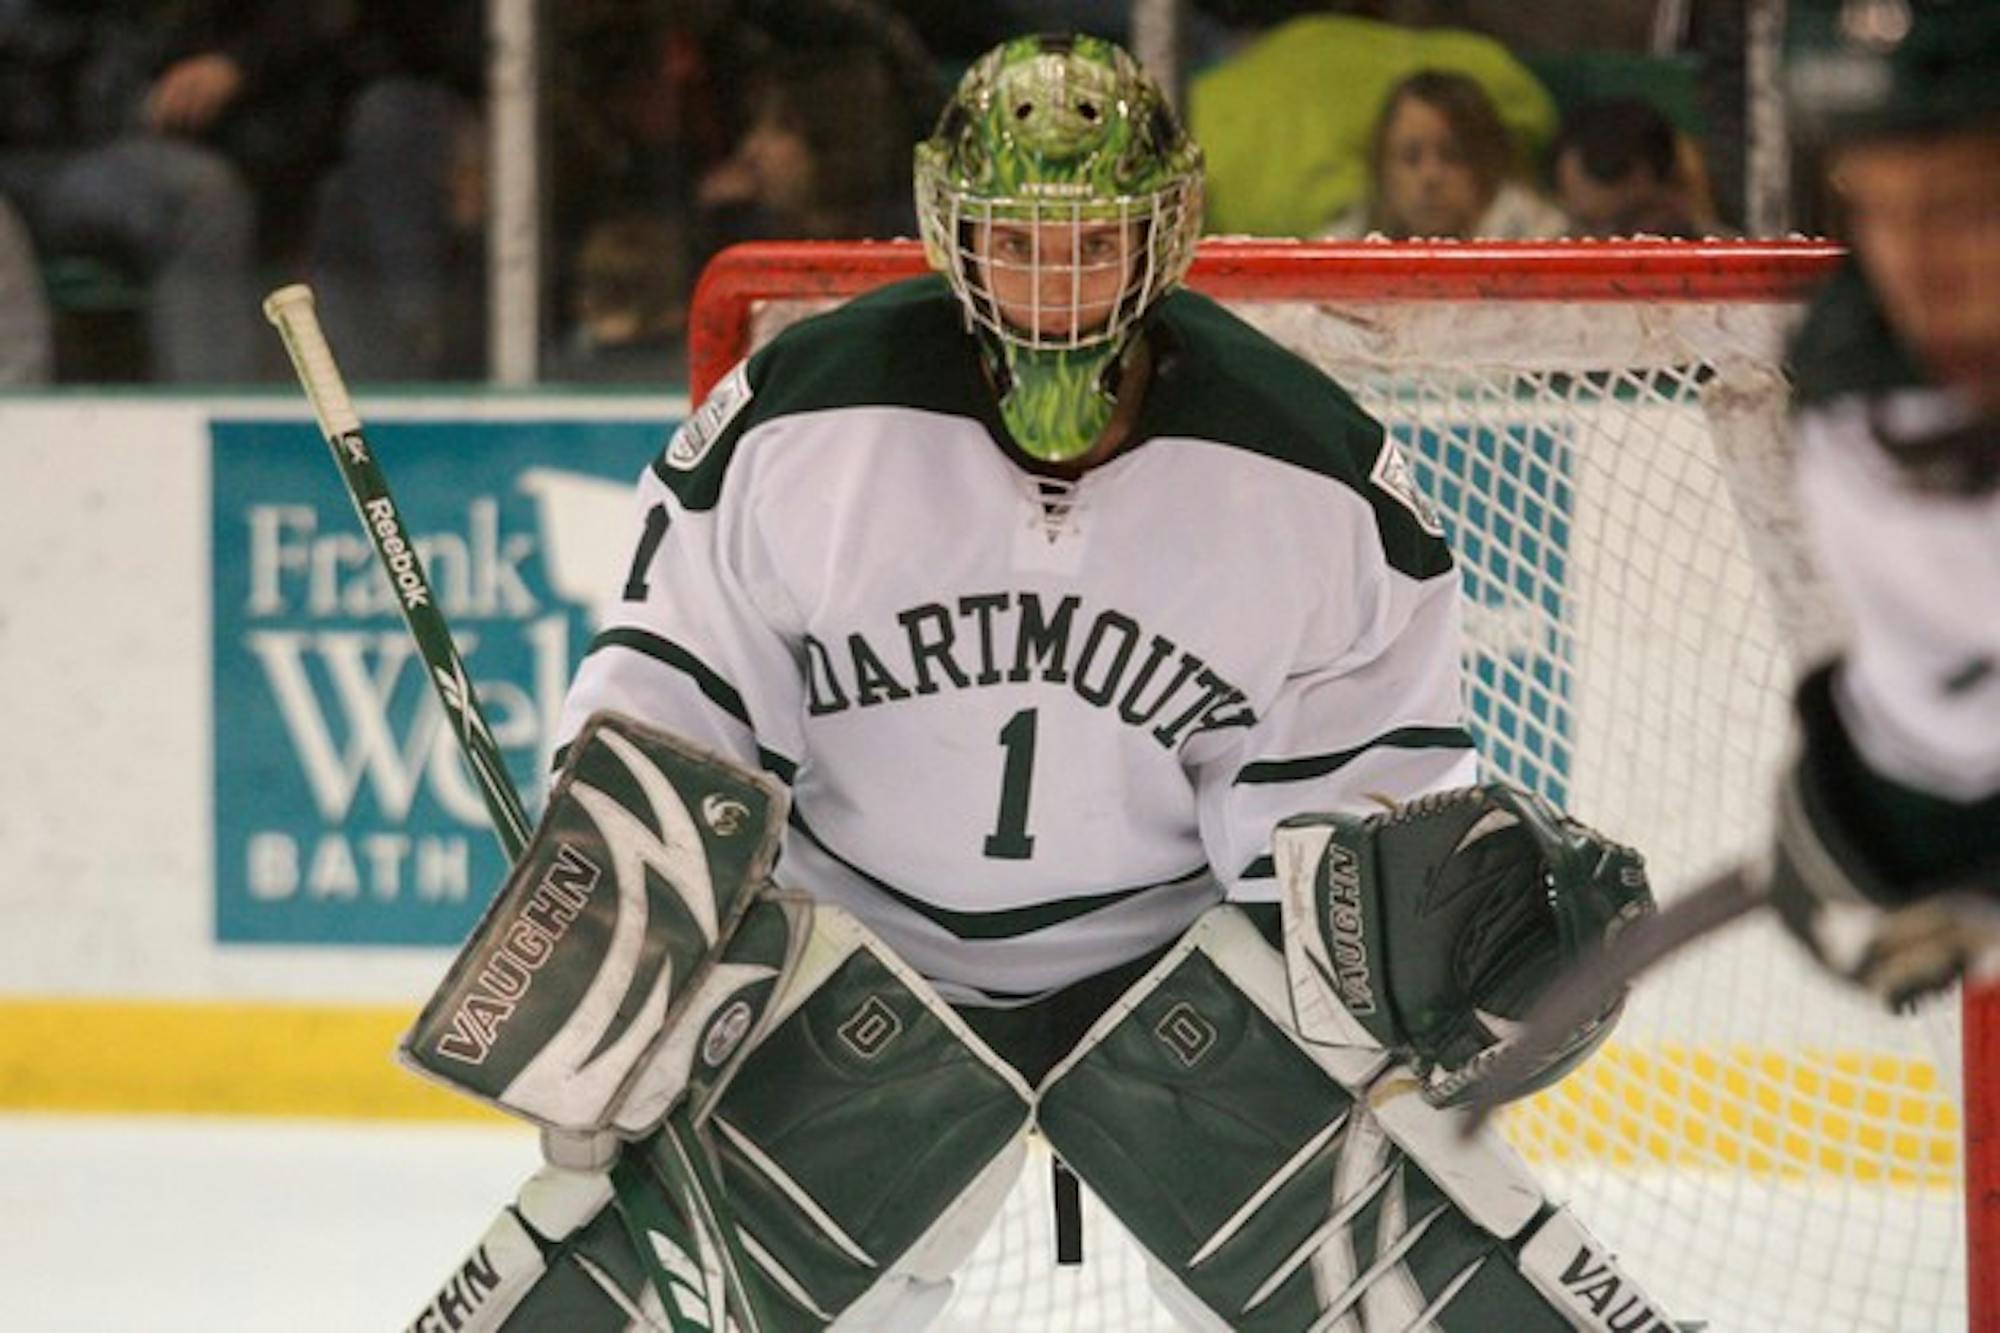 Big Green goalie Jody O'Neill '12 made 32 saves in Dartmouth's 6-4 loss to UNH on Saturday in Manchester, N.H.